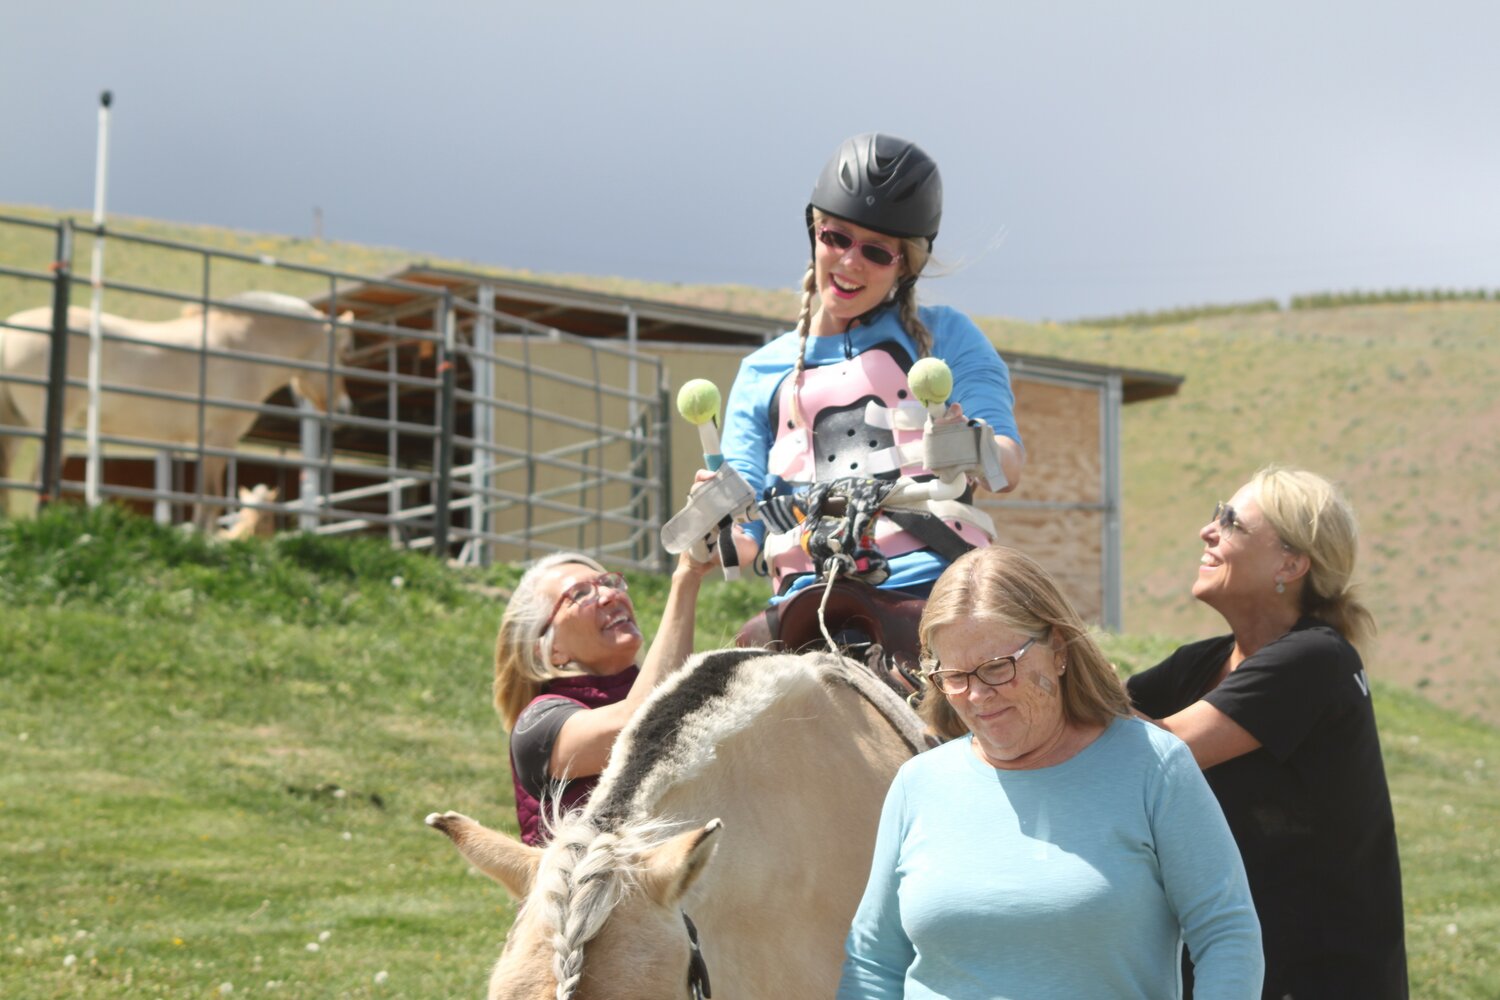 From left, Nancy Grette, Laurie Steward, and Susan Wall assist Crystal Chevelle as she rides 
her horse Frid during a session at Alatheia Therapeutic Riding Center in Wenatchee. 
Photo by Matthew Ockinga